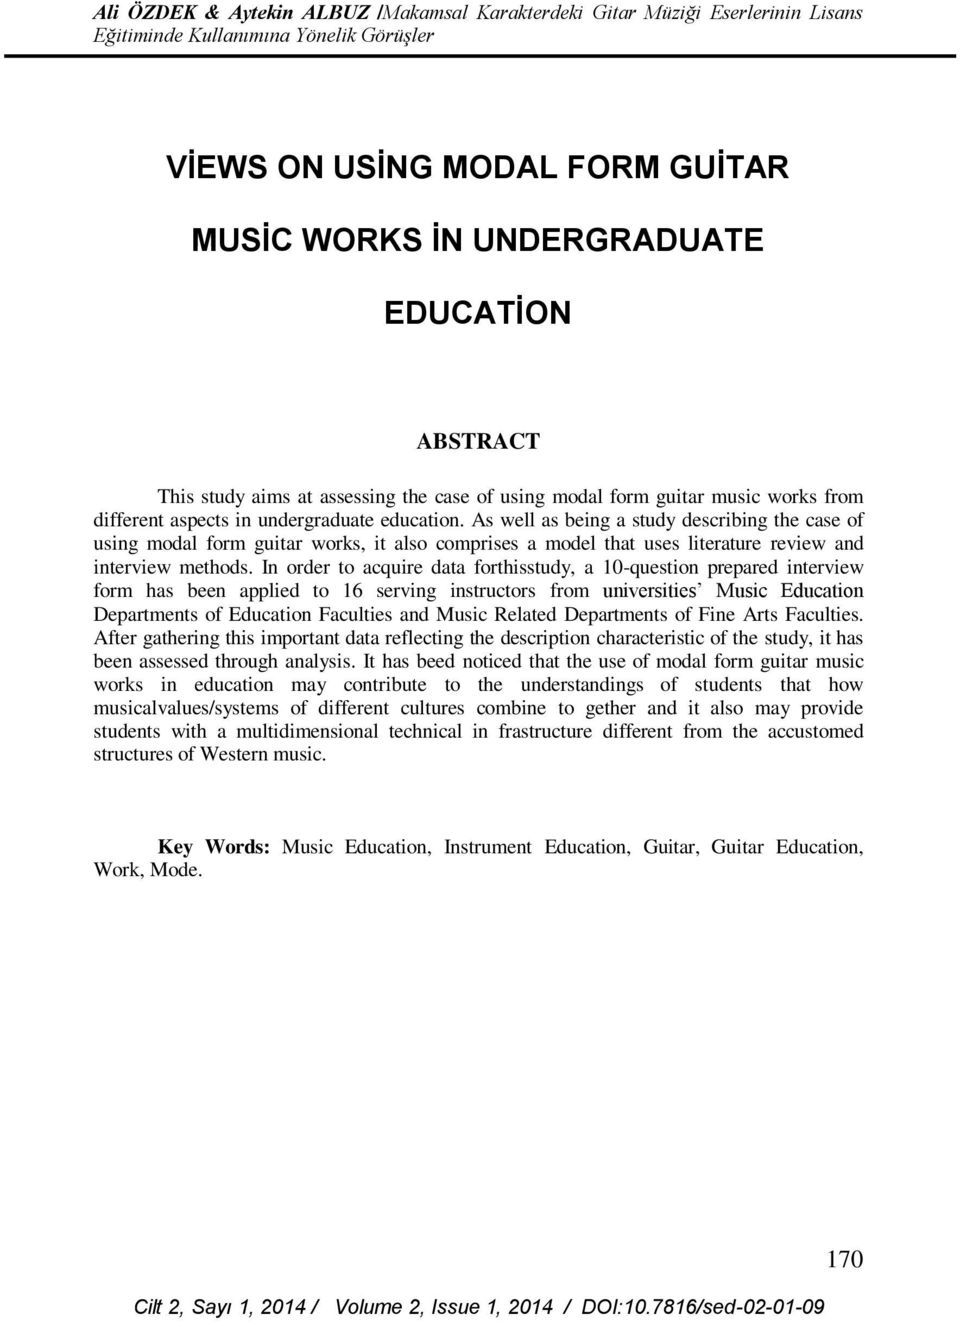 In order to acquire data forthisstudy, a 10-question prepared interview form has been applied to 16 serving instructors from universities Music Education Departments of Education Faculties and Music